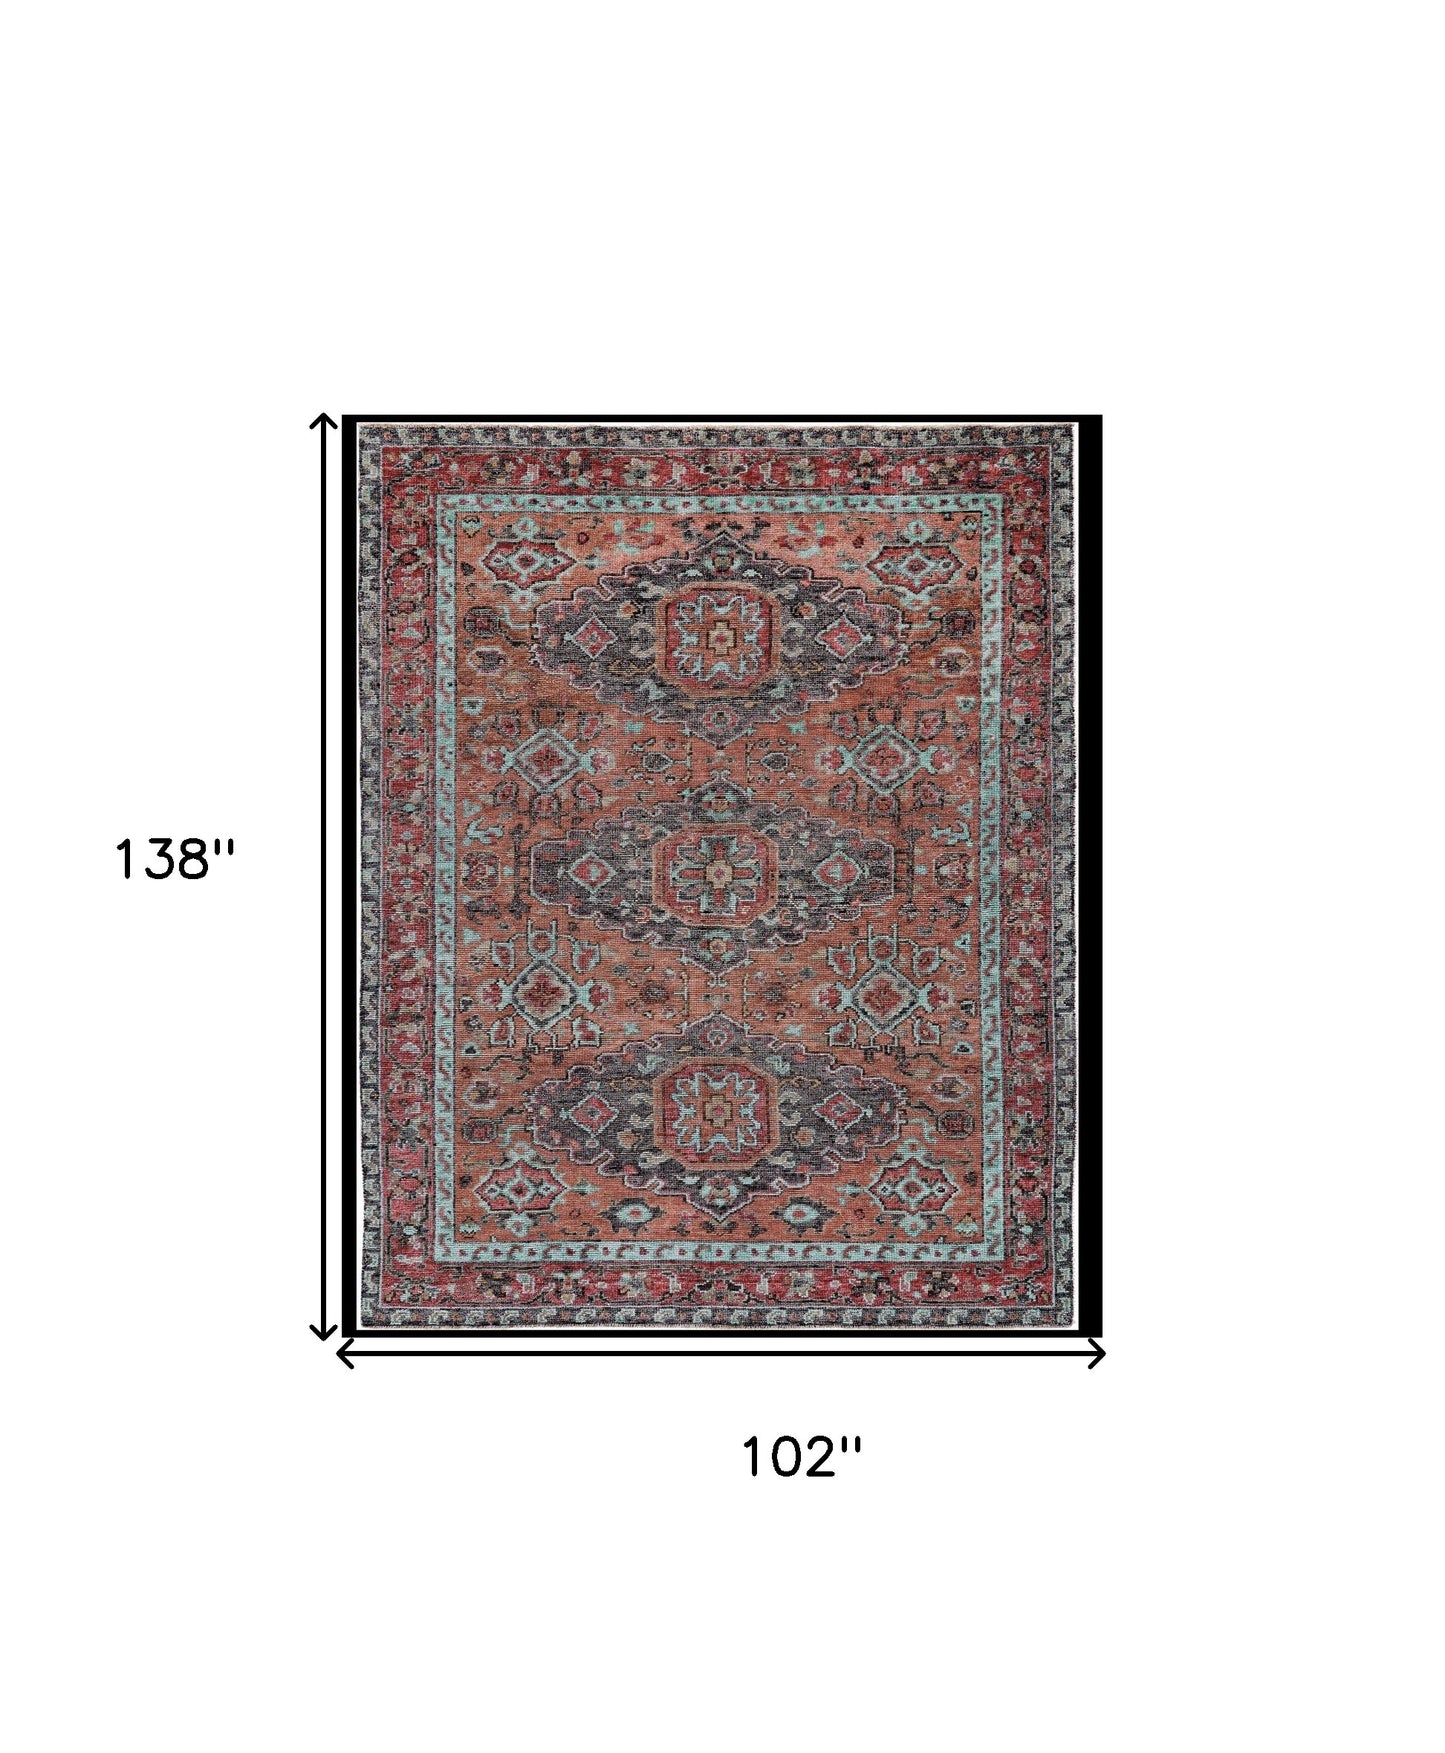 9' X 12' Red Orange And Blue Wool Floral Hand Knotted Distressed Stain Resistant Area Rug With Fringe